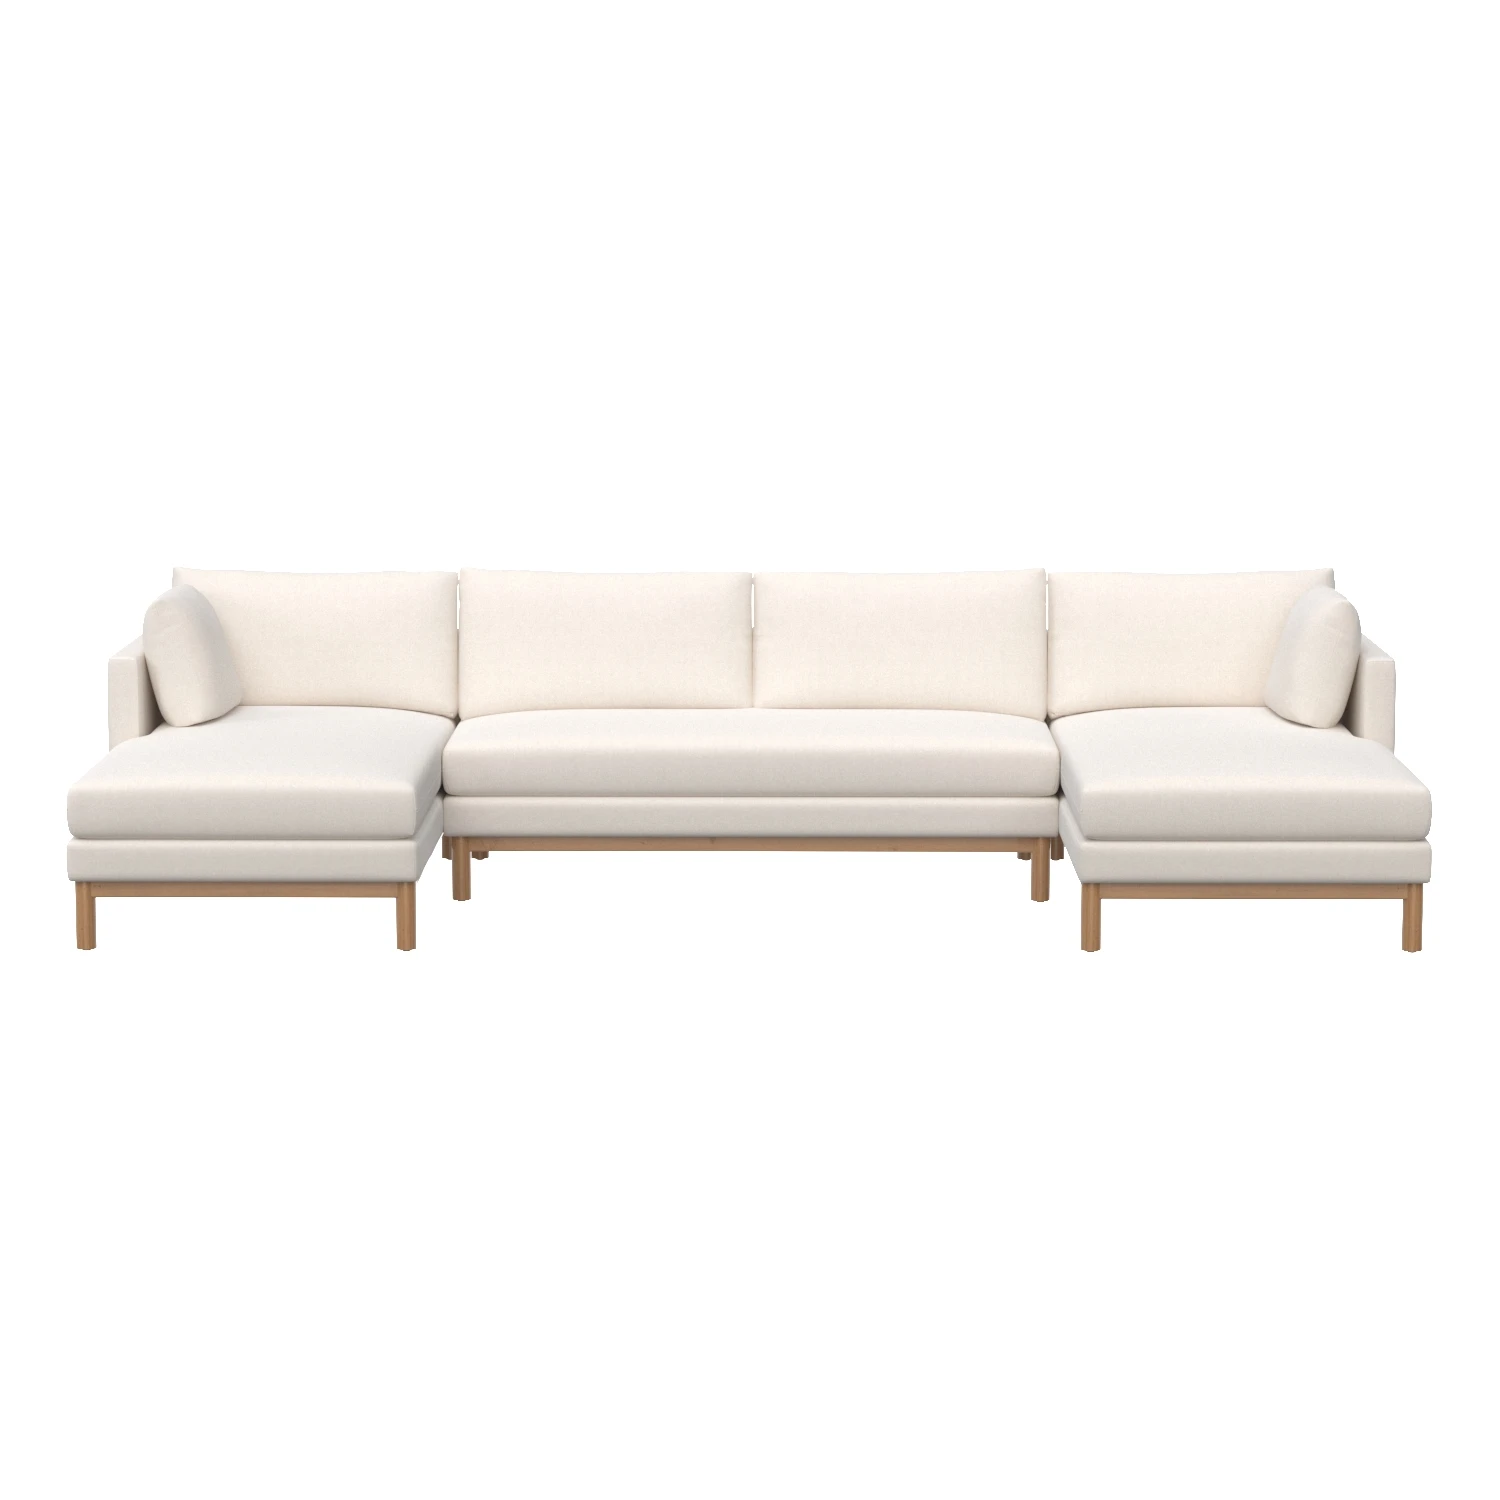 Hargrove 3-Piece U-Shaped Chaise Sectional 138 inch 3D Model_01